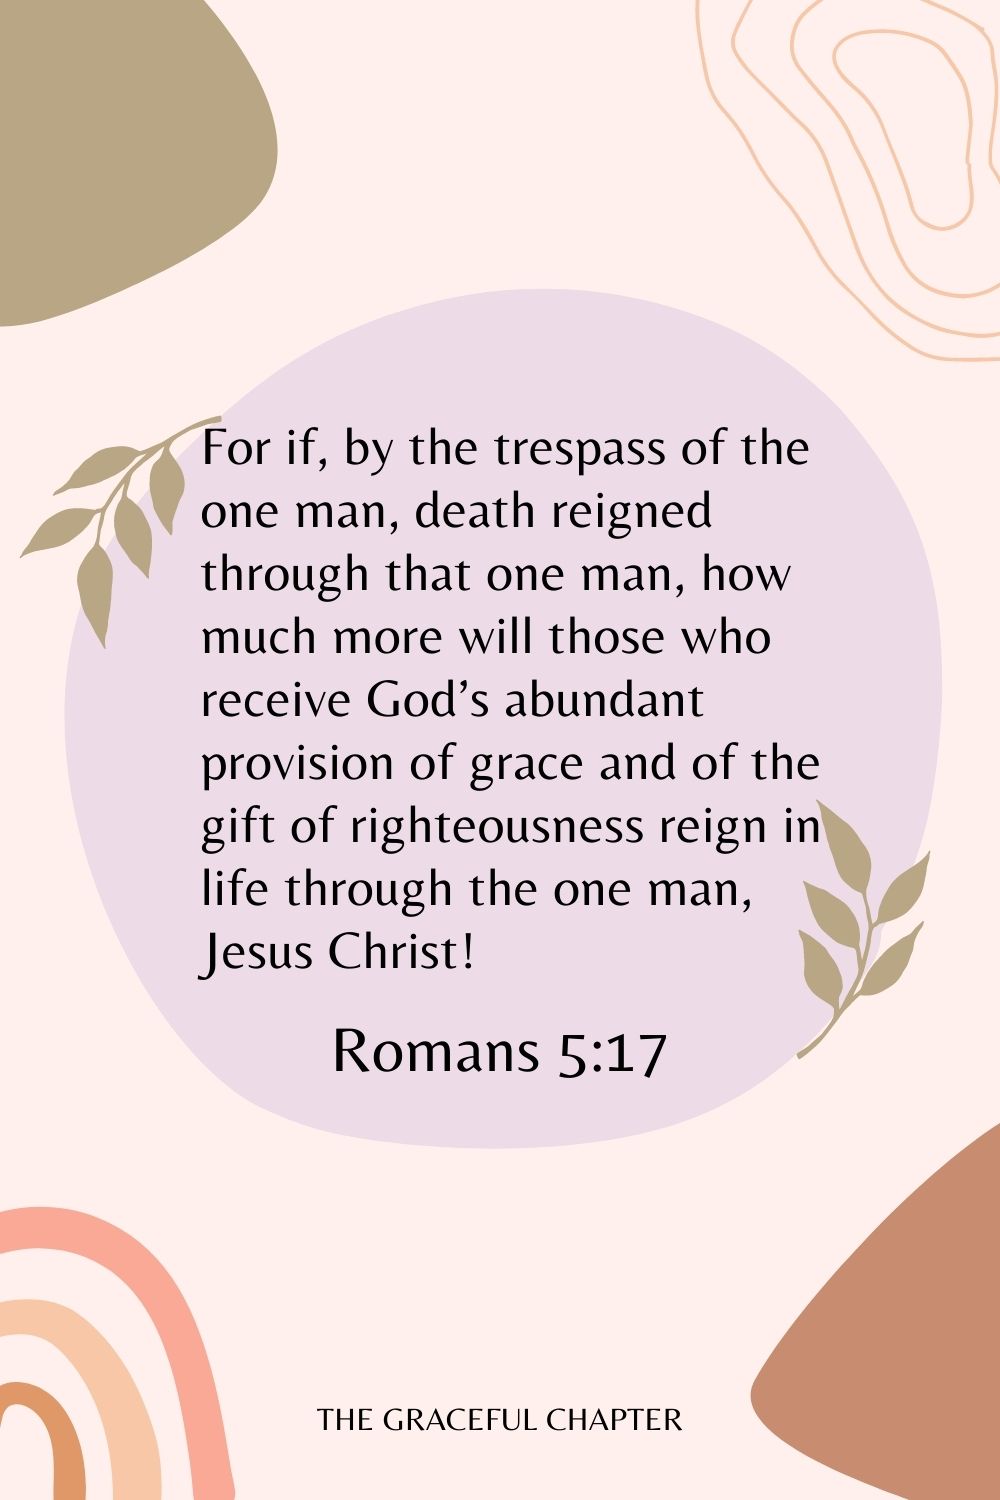 For if, by the trespass of the one man, death reigned through that one man, how much more will those who receive God’s abundant provision of grace and of the gift of righteousness reign in life through the one man, Jesus Christ! Romans 5:17